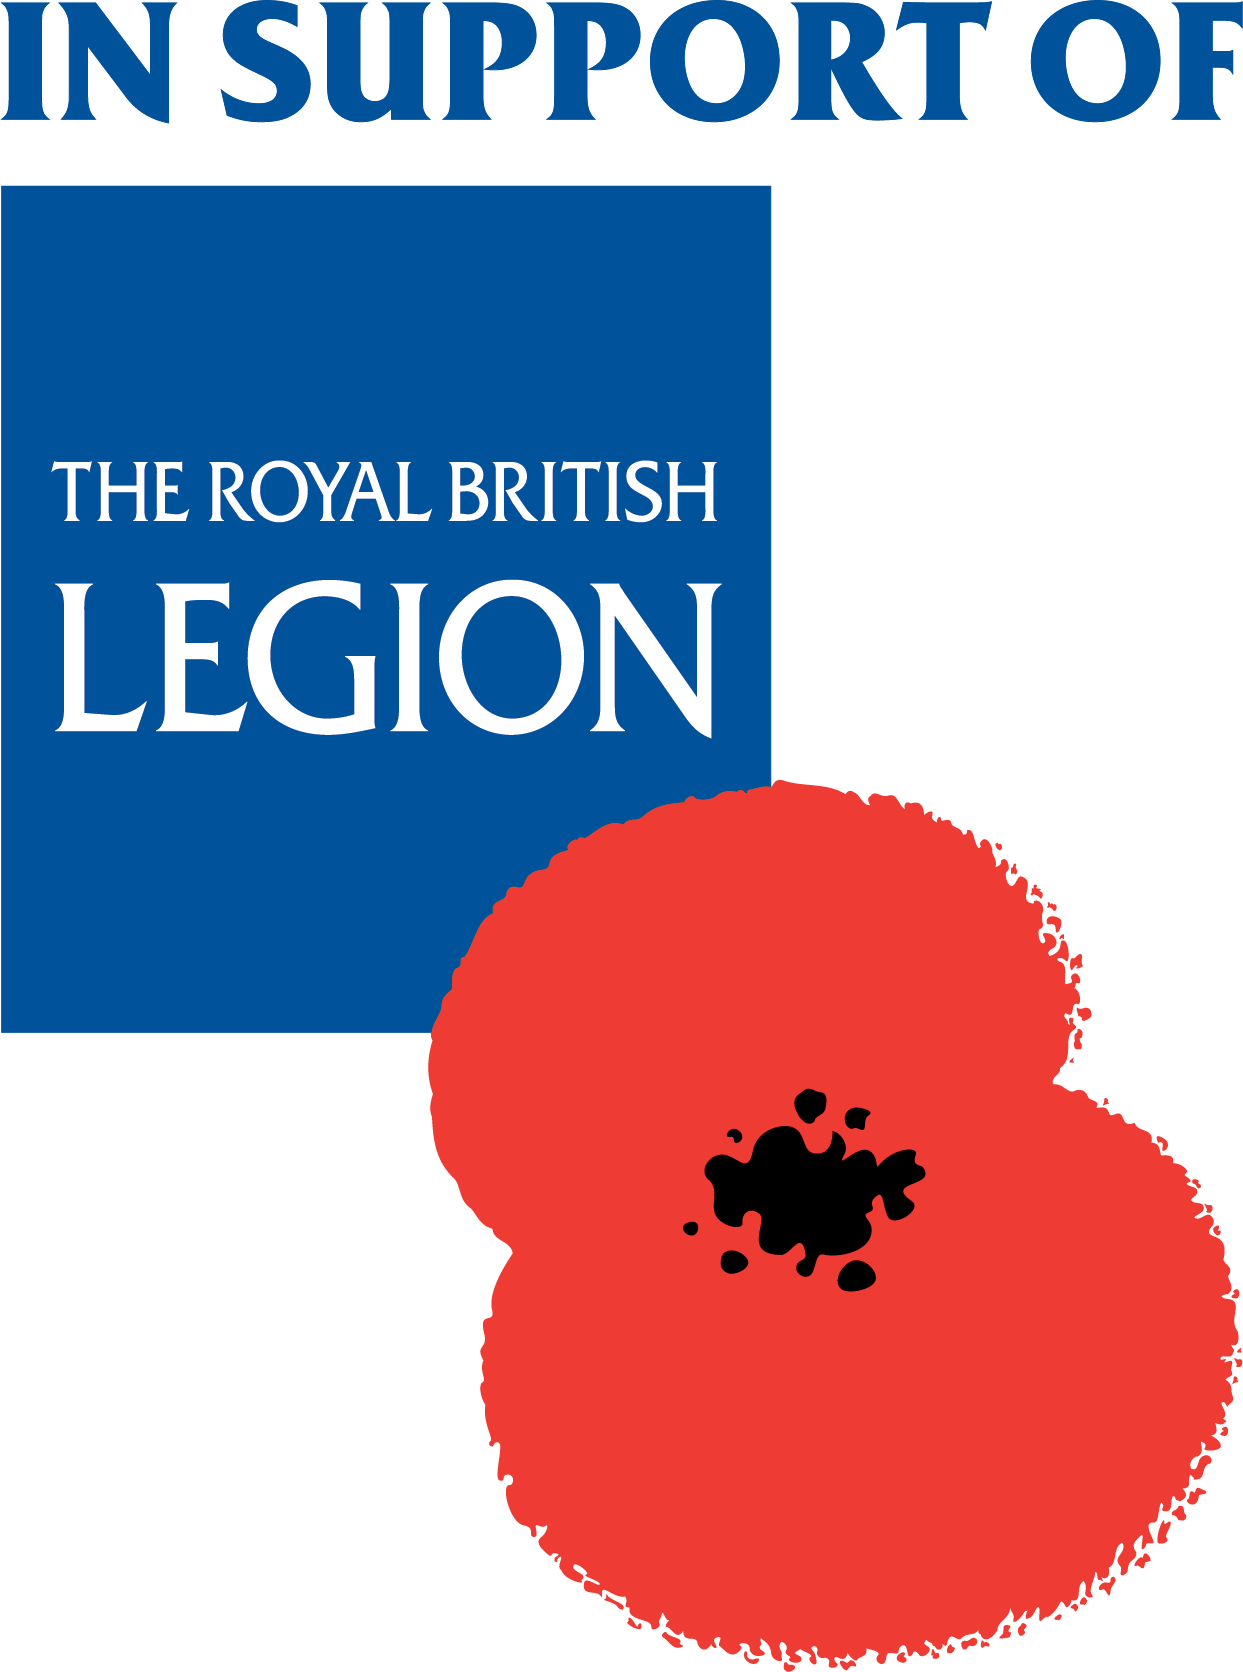 find out more about the The Royal British Legion